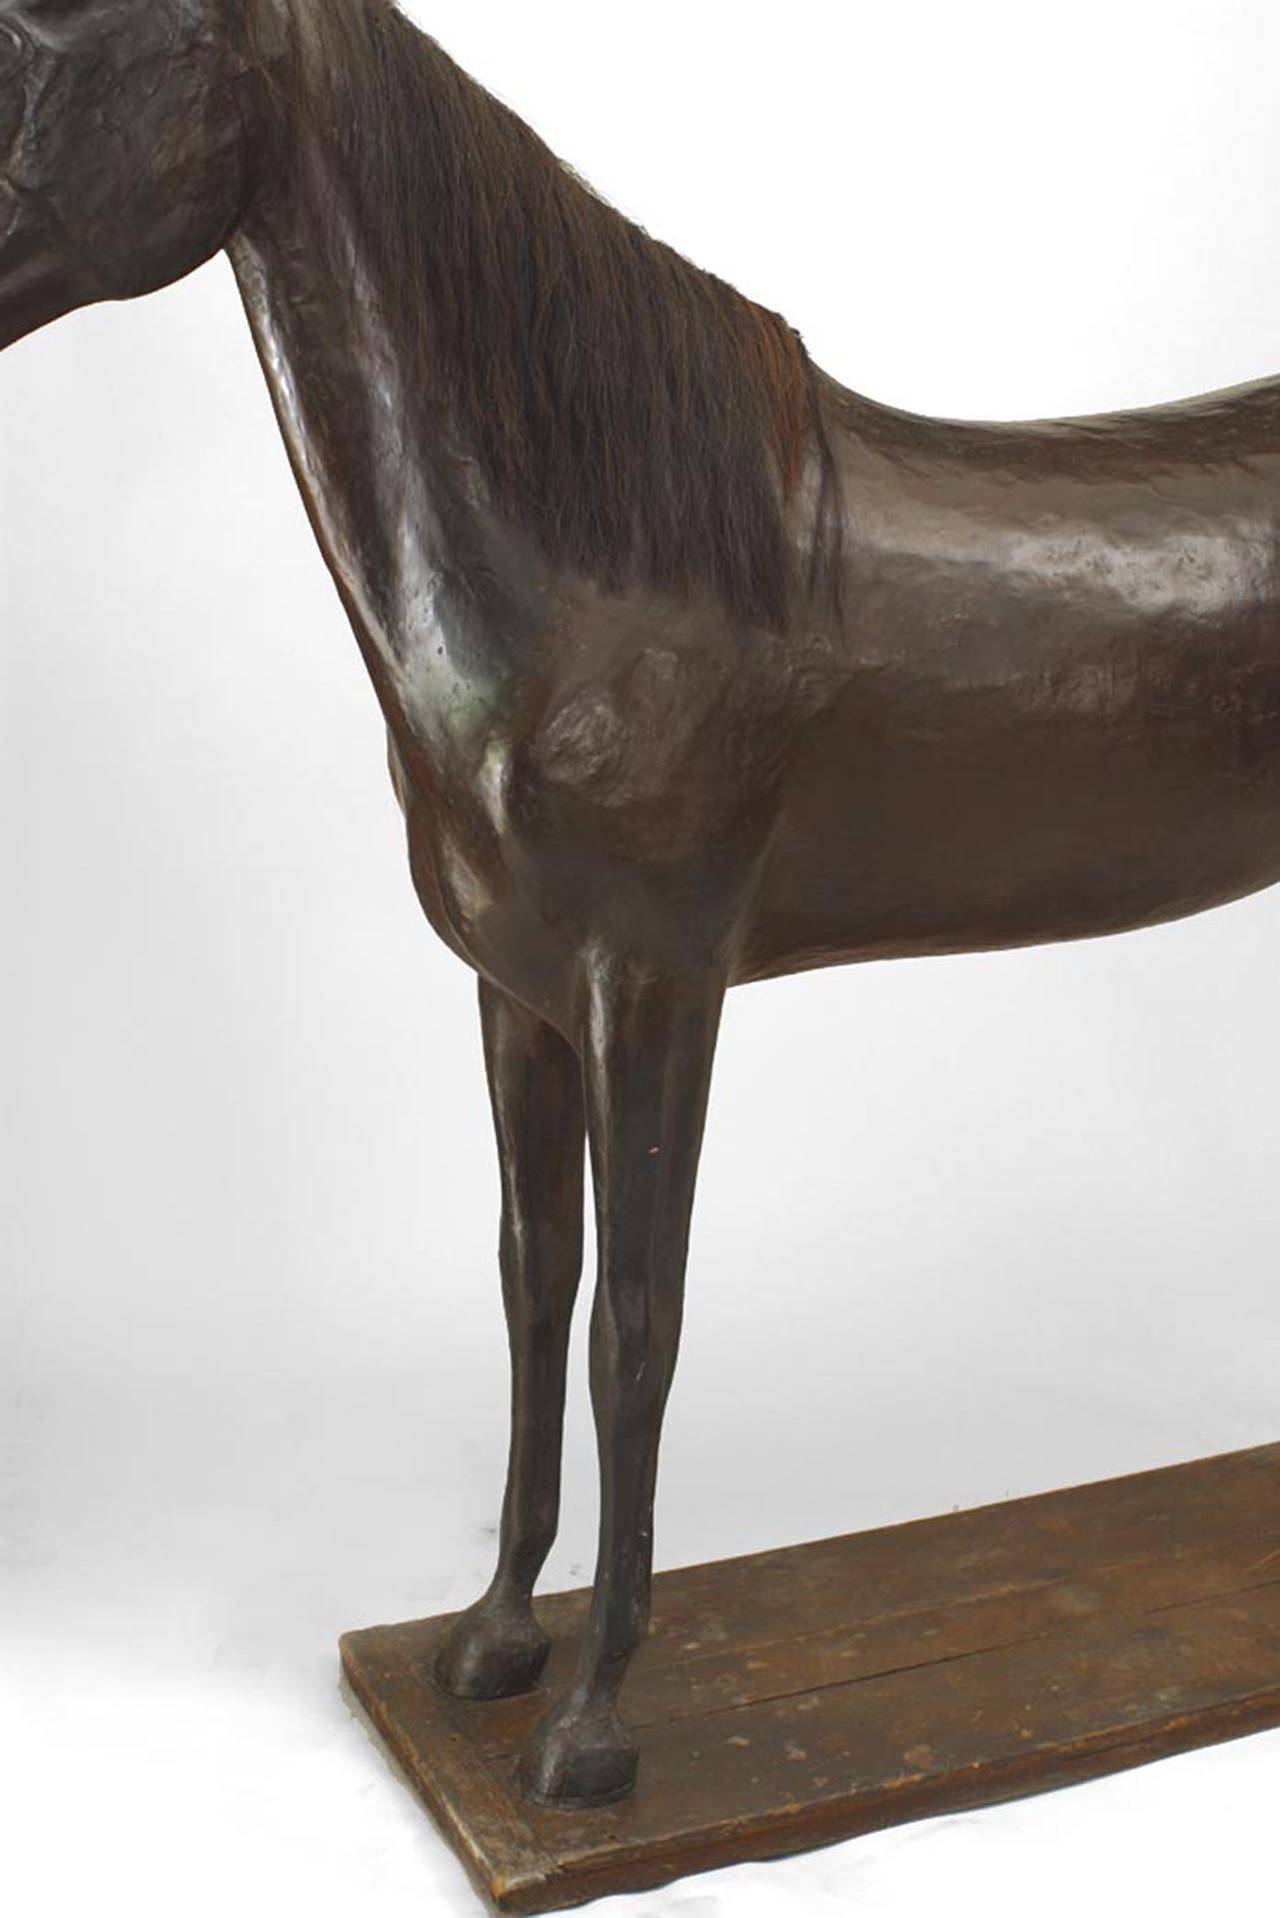 English Country style papier mache life size model of horse on rectangular platform base. (19/20th Cent.)
